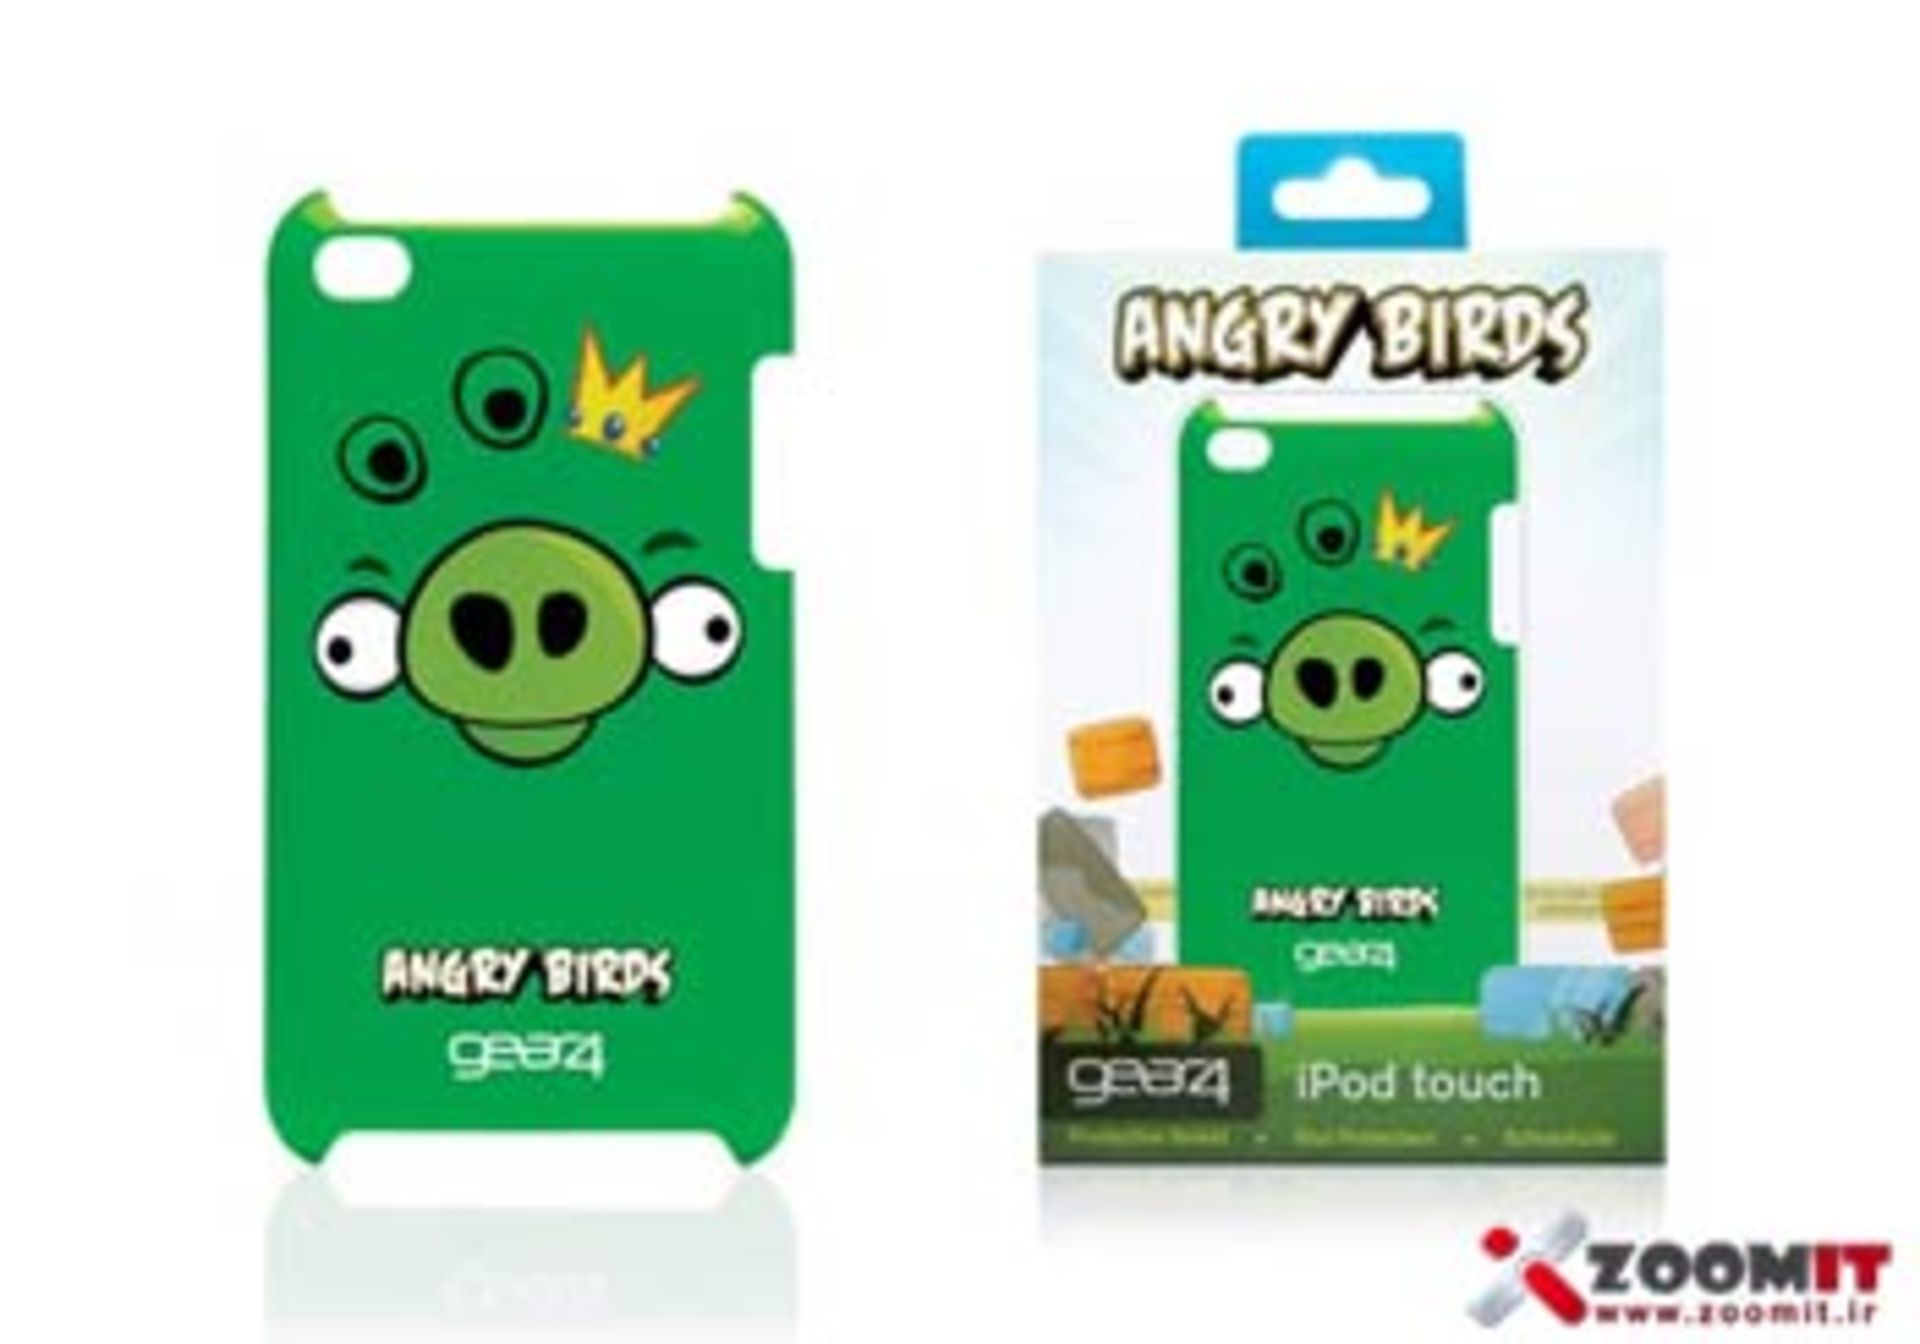 angry_birds_ipod_touch_4g_case_1